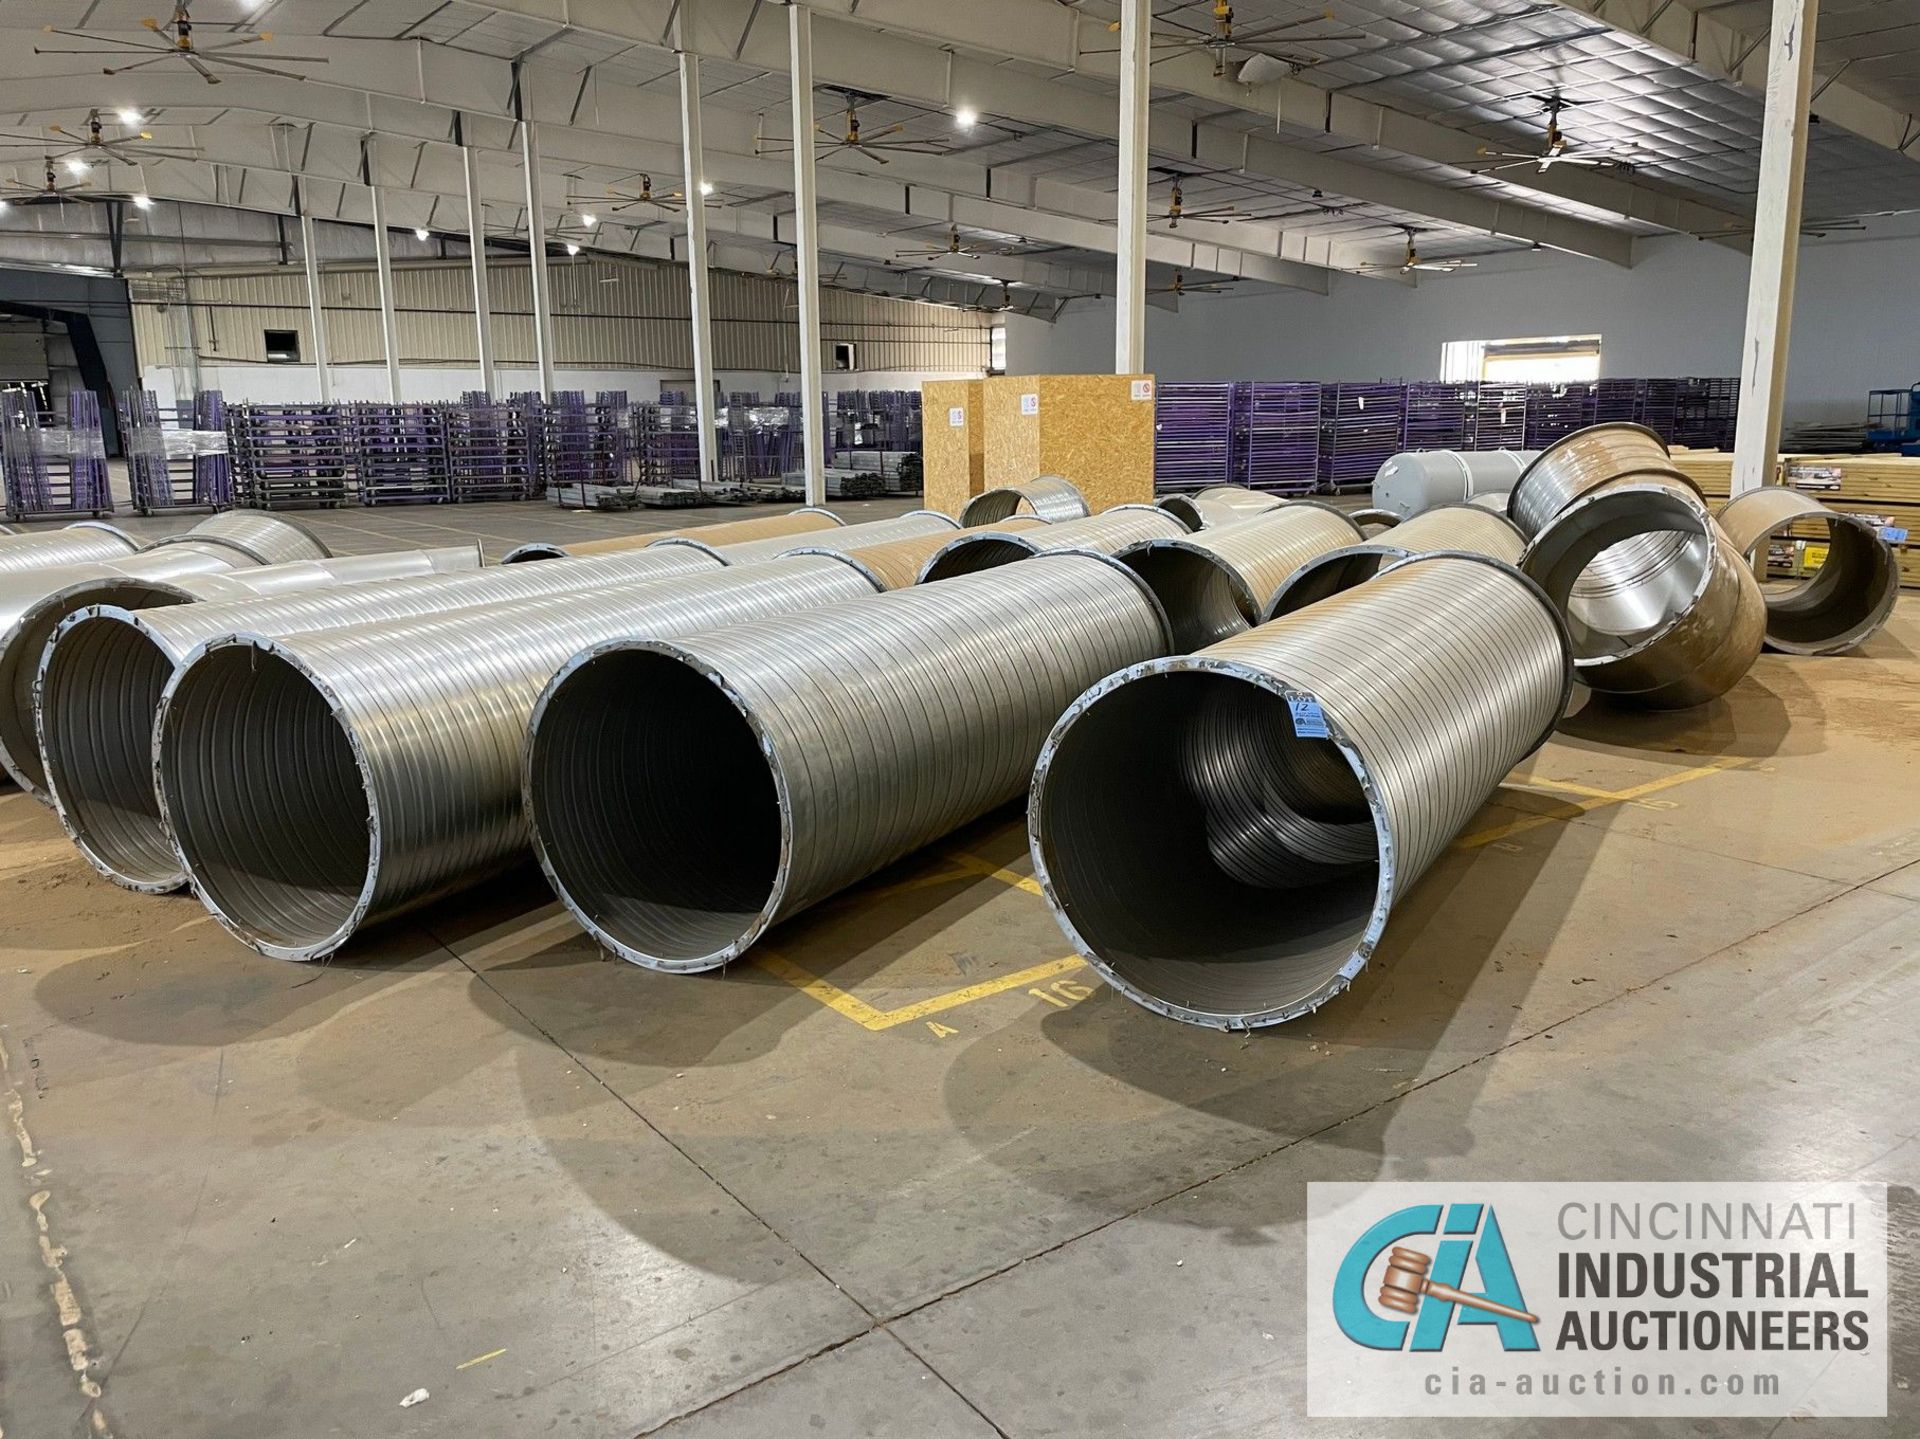 (LOT) GALVANIZED SPIRAL DUCT WORK ON GROUND; APPROX. (11) 10' X 37.5" DIA. PCS, (1) 8' X 37.5"